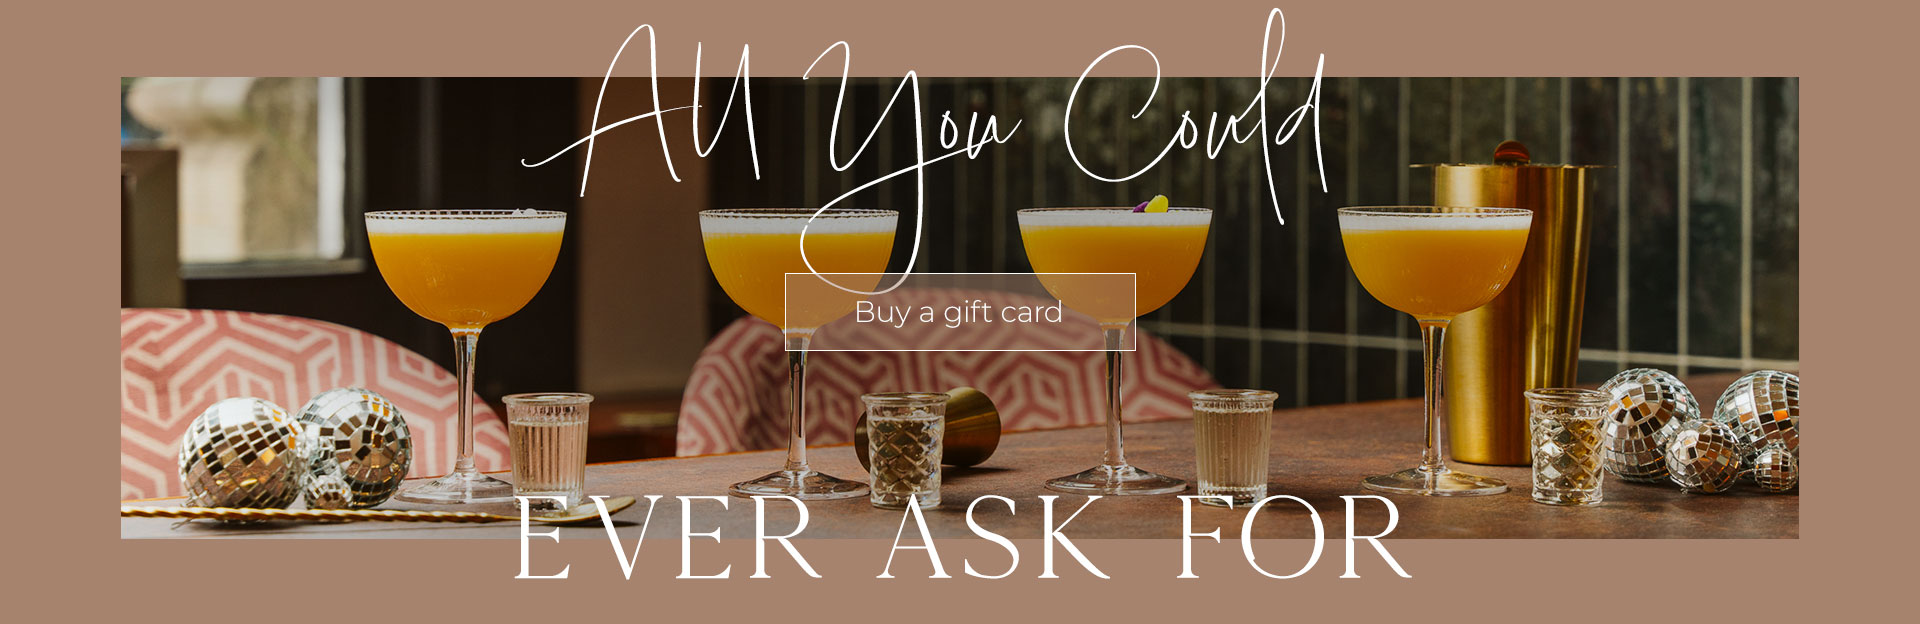 All Bar One Gift Cards at All Bar One Regent Street